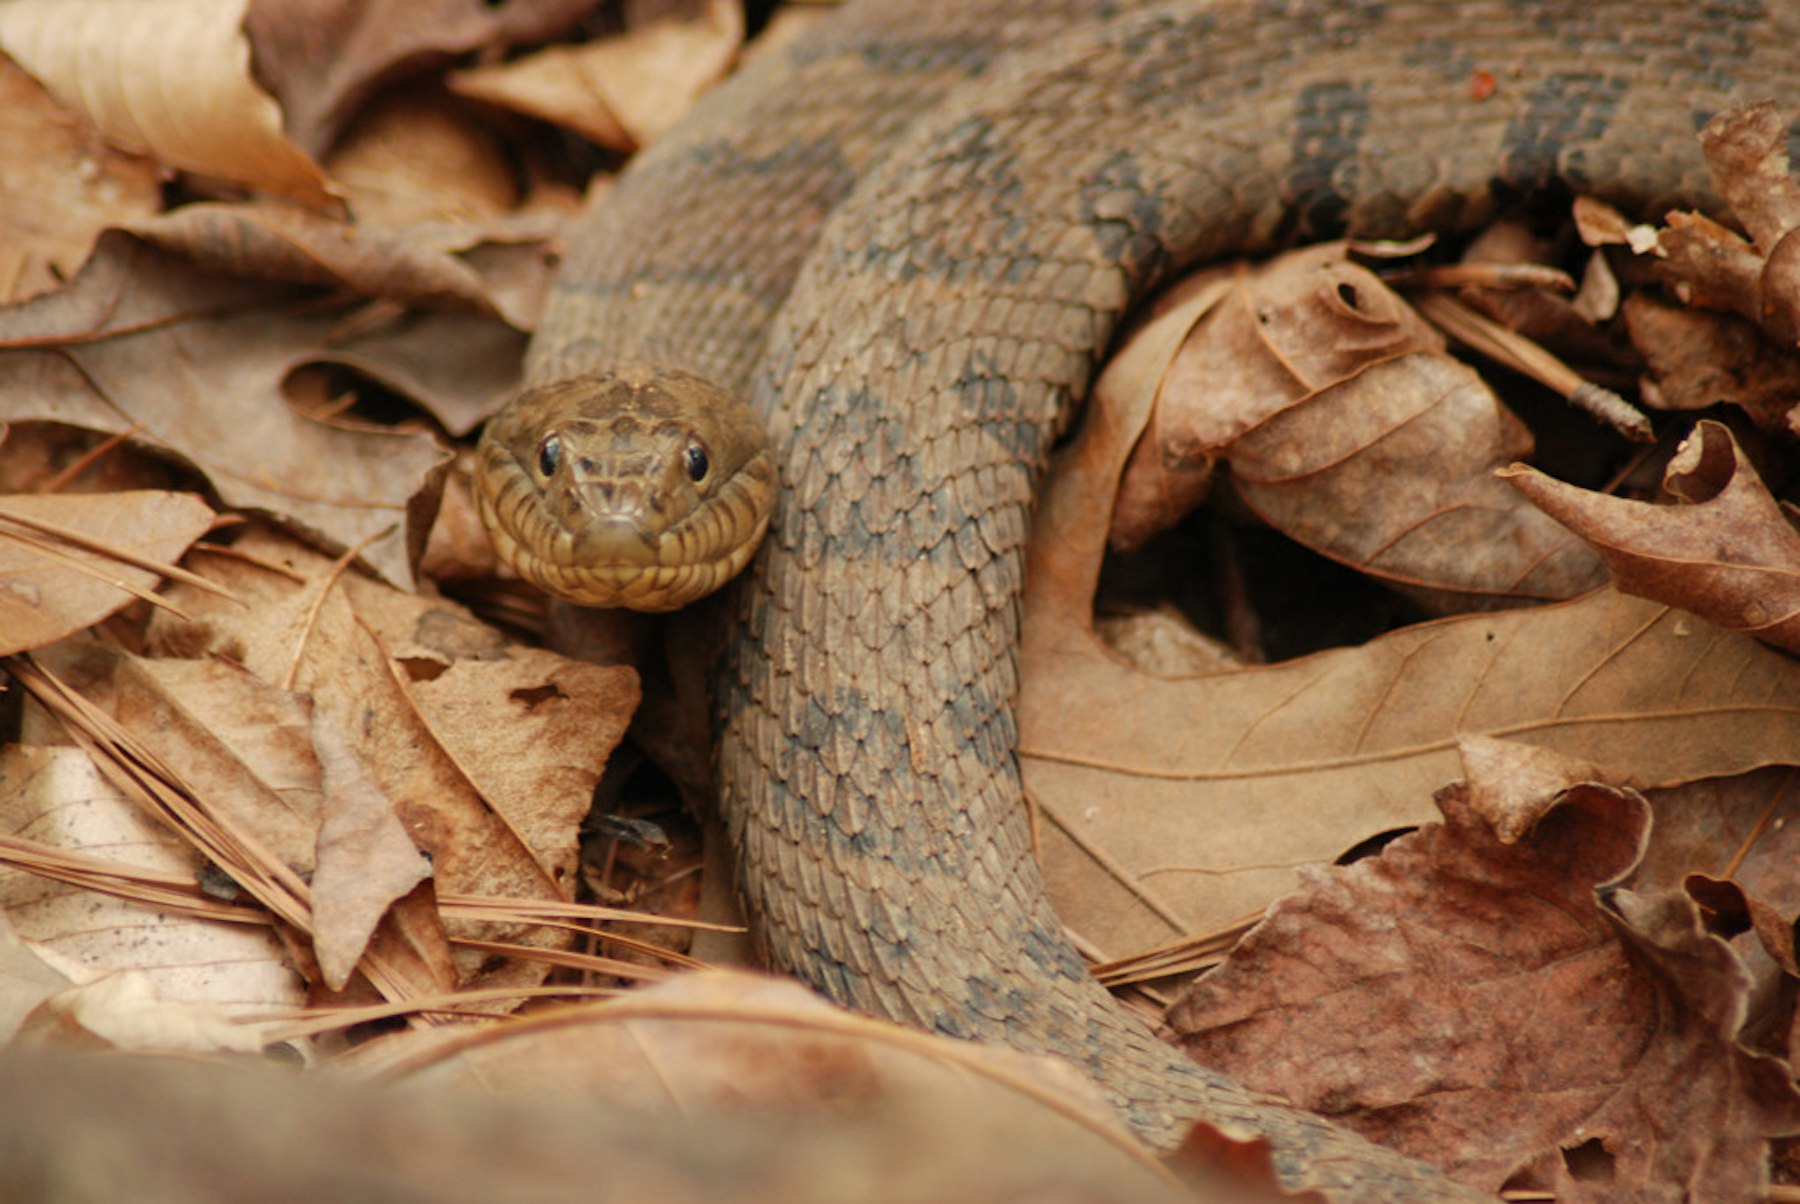 A Grass Snake Plays Dead on a Cold Autumn Day